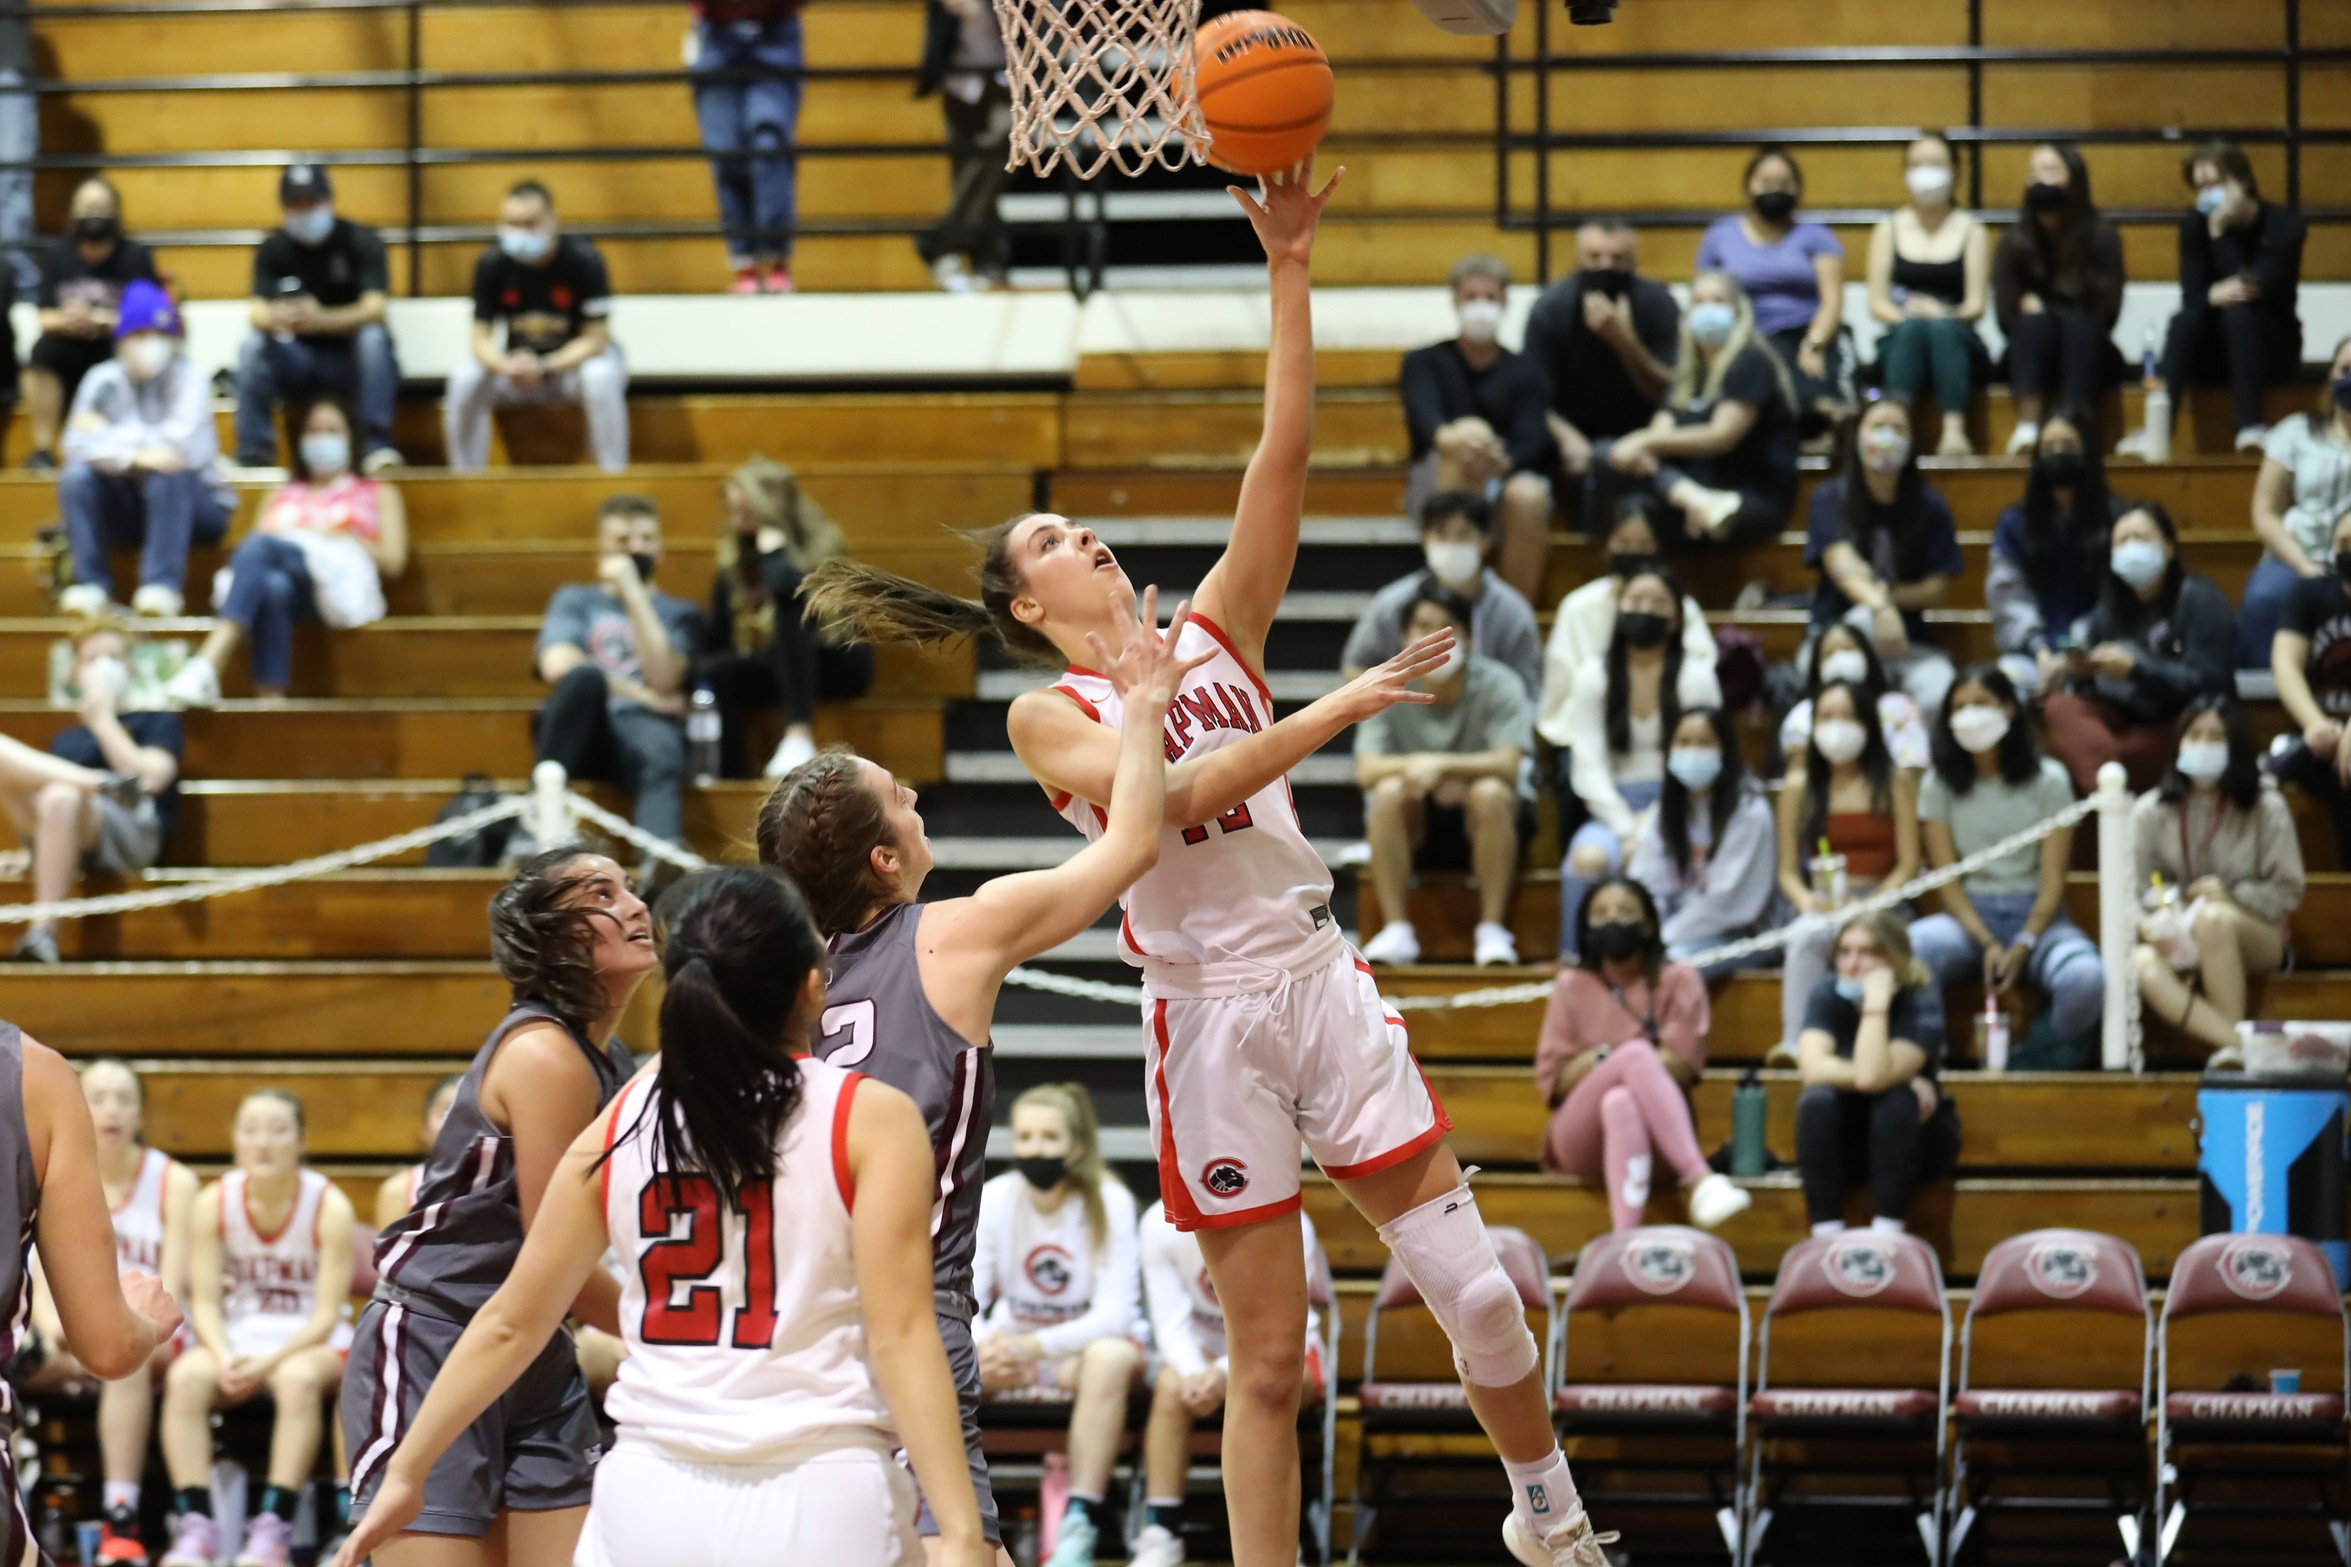 Julia Strand jumps up to the basket with the basketball 